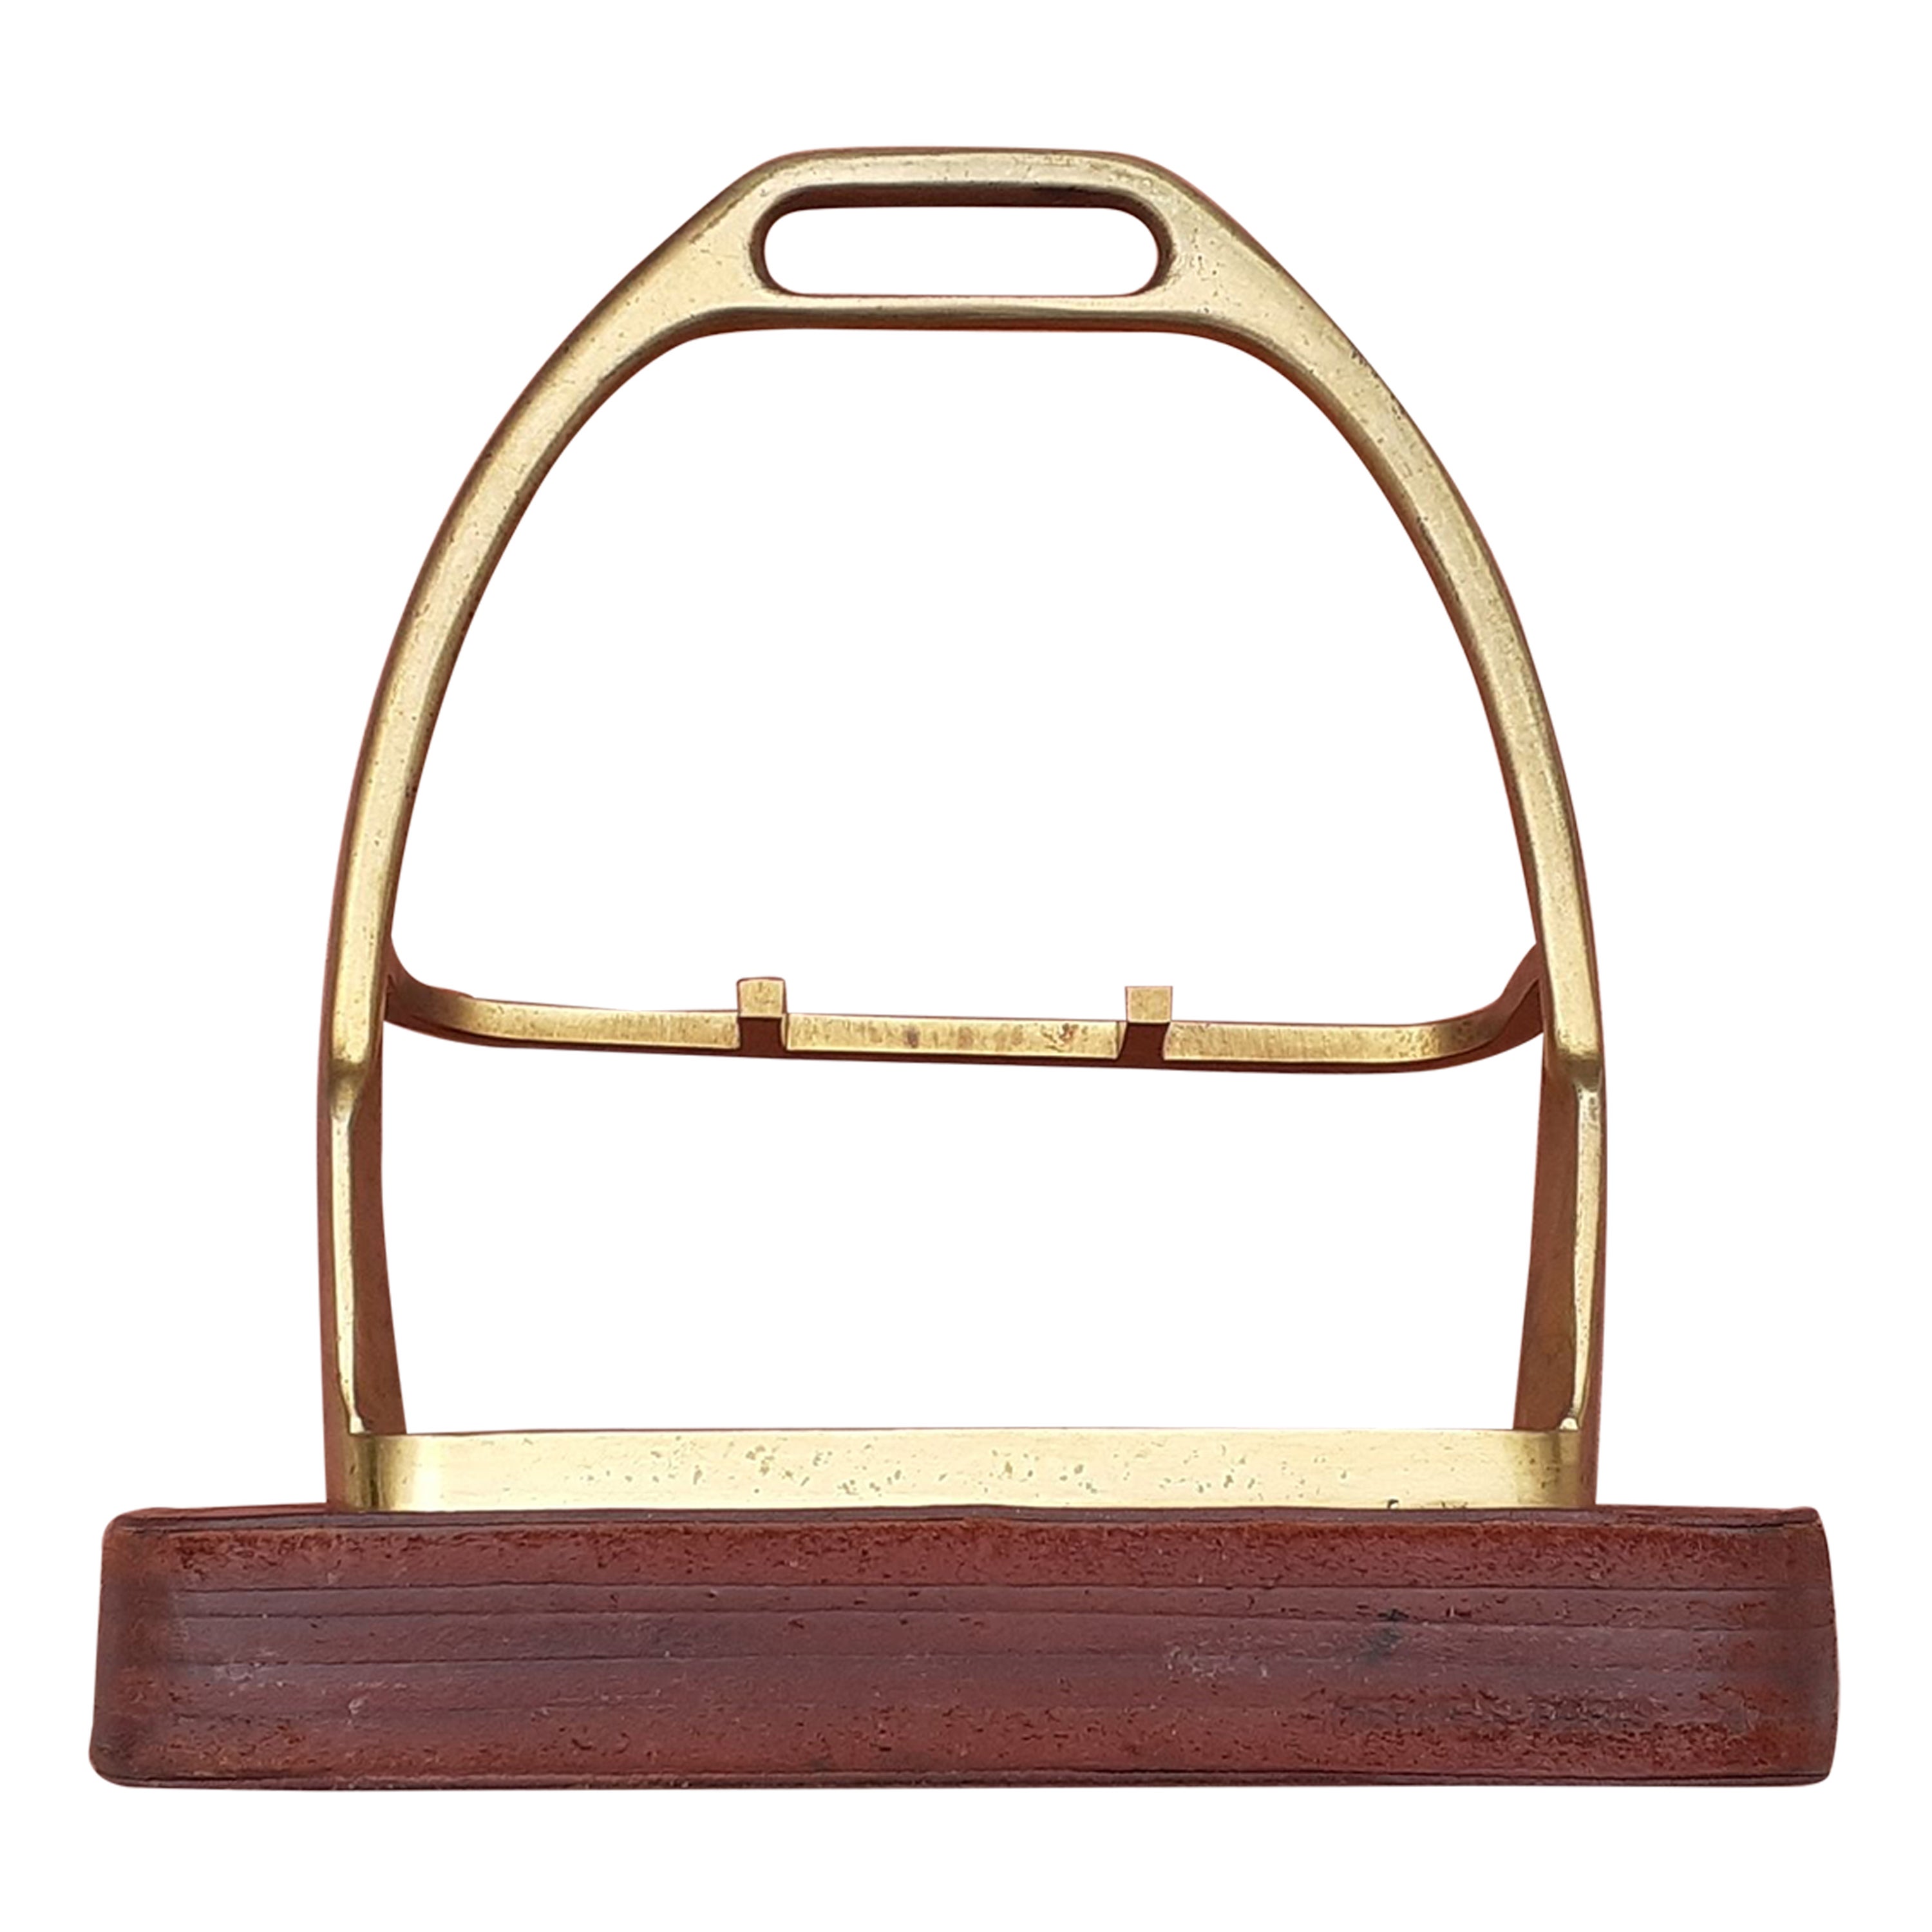 Exceptional Hermès Pipe Holder Stirrup Shaped in Brass and Leather Texas